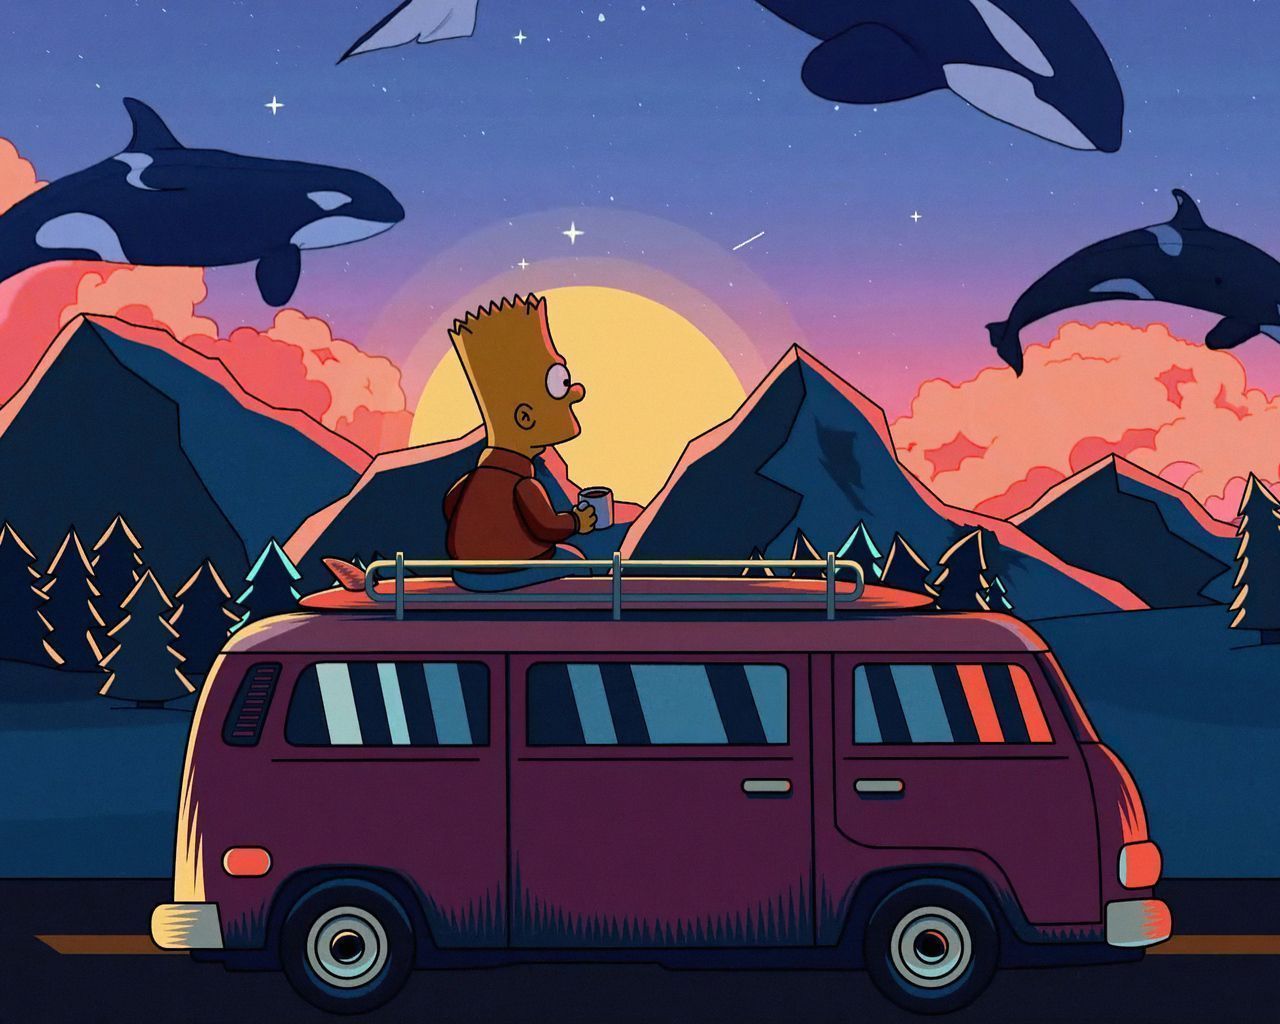 A digital artwork of Bart Simpson sitting on top of a van, watching orcas and a sunset - Bart Simpson